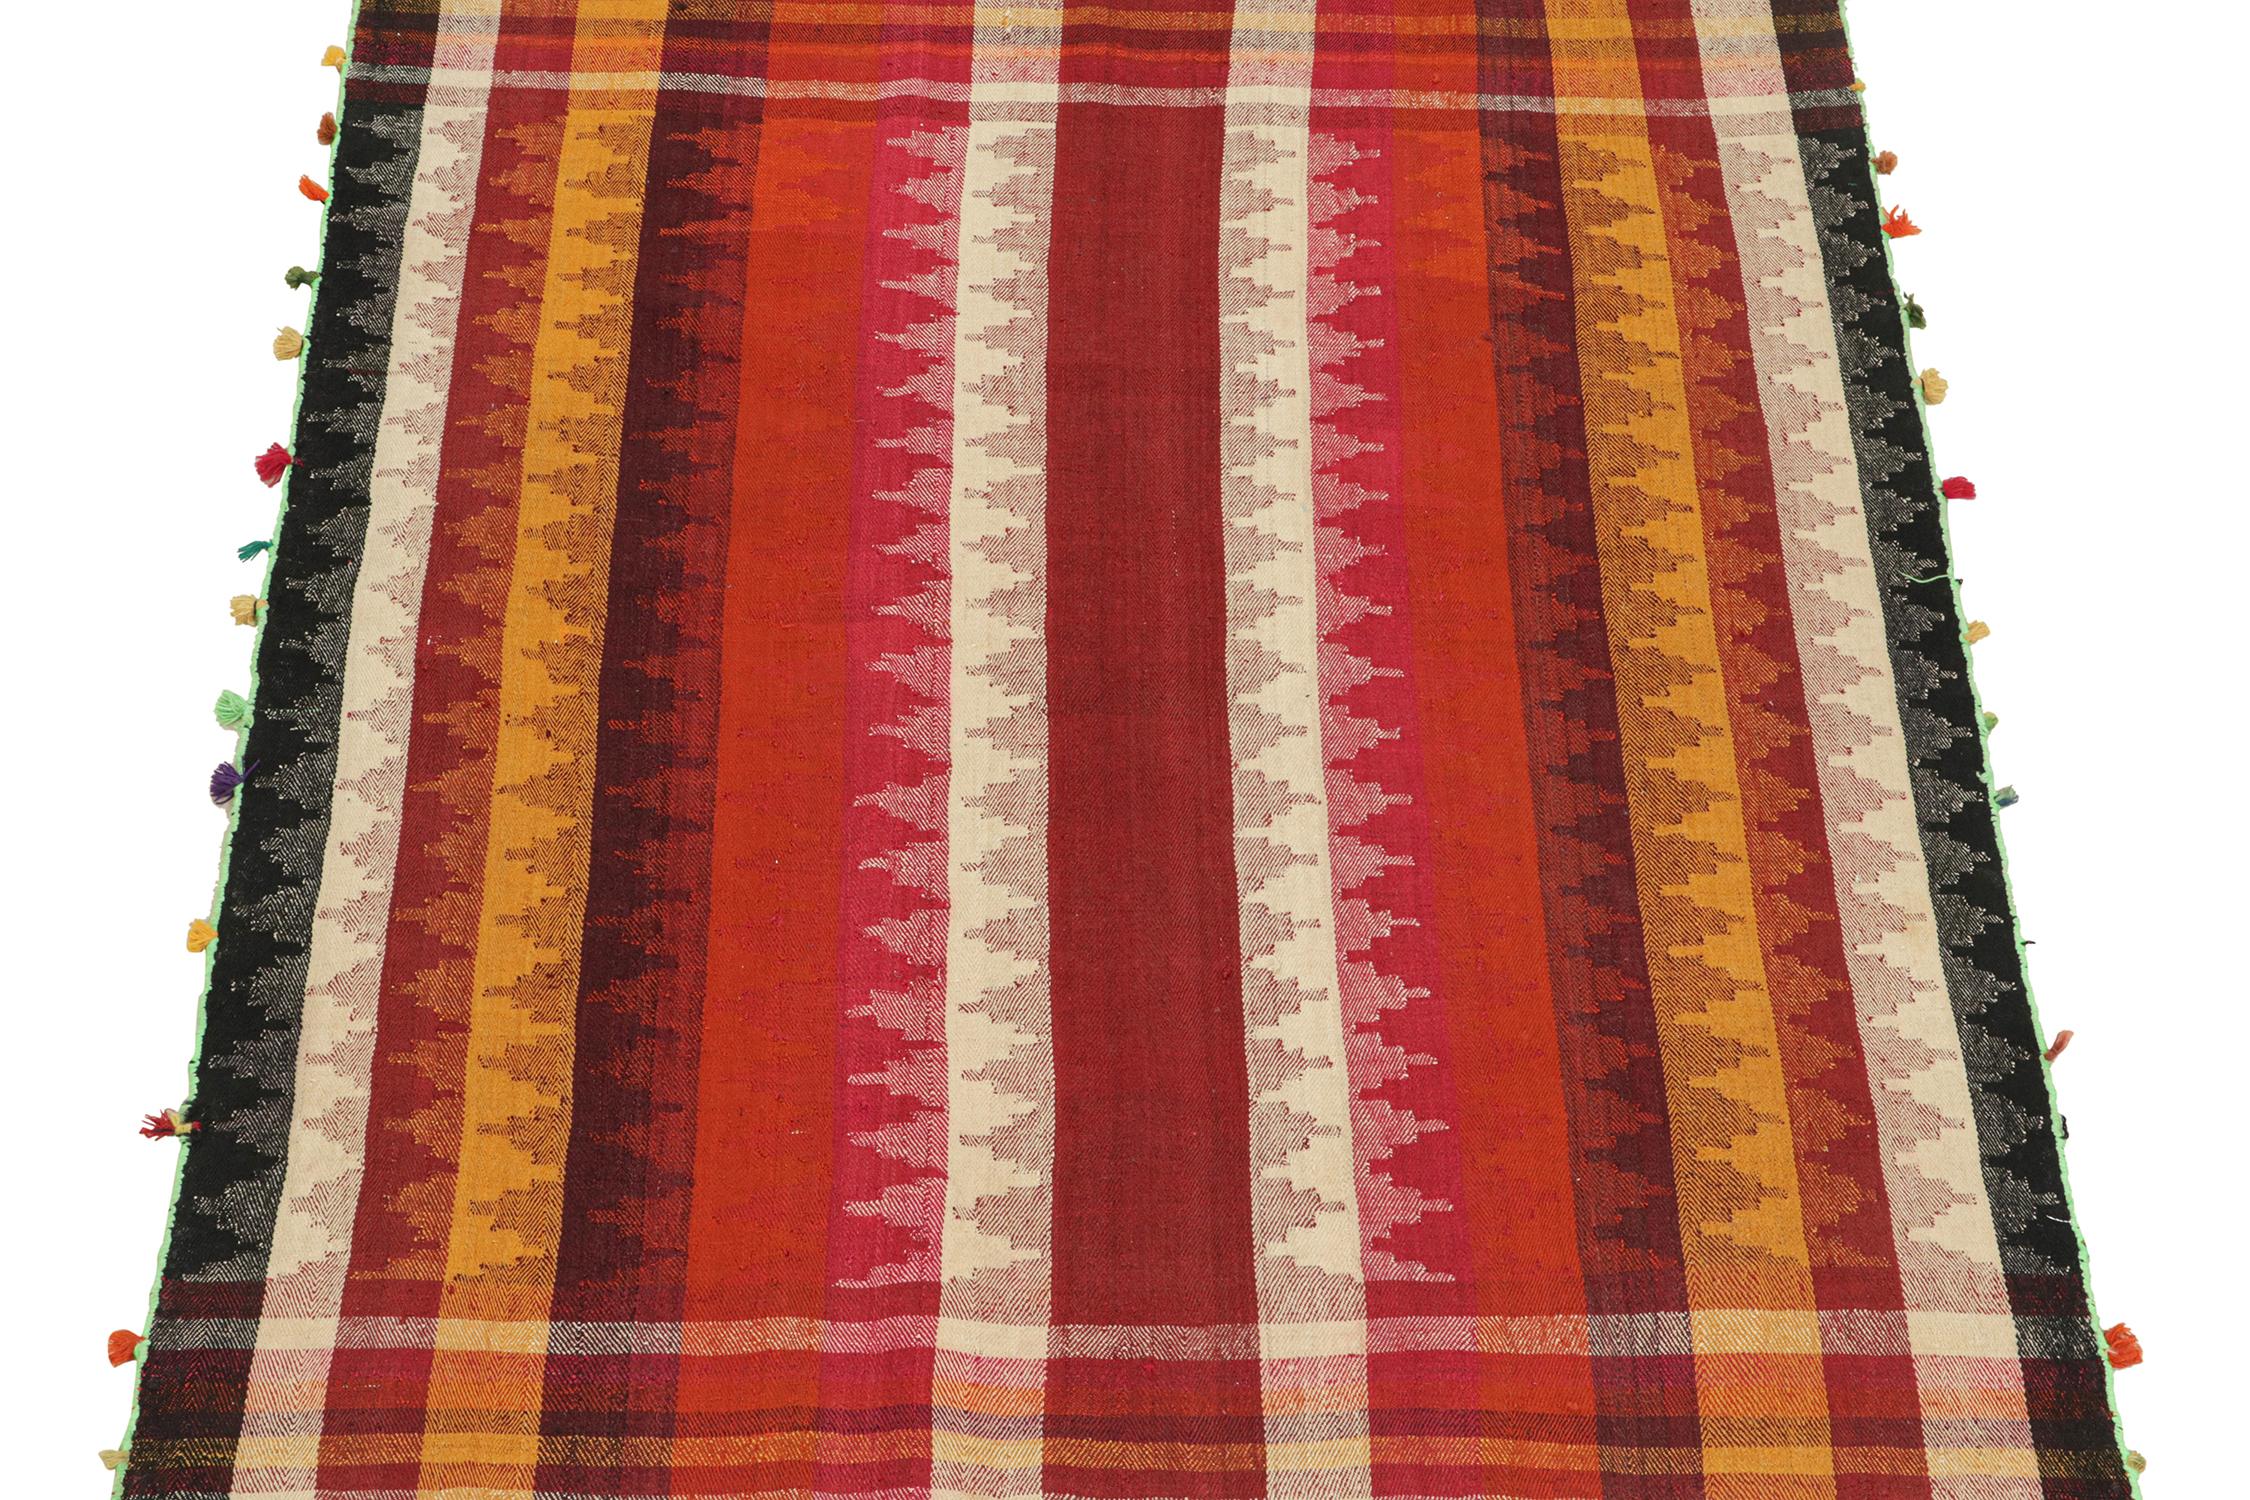 This vintage 5x7 Persian kilim is a mid-century tribal rug, handwoven in wool circa 1950-1960.

The design enjoys vertical stripes and plaid borders relishing bright and warm red, black, white, orange, and gold tones. Keen eyes will further note